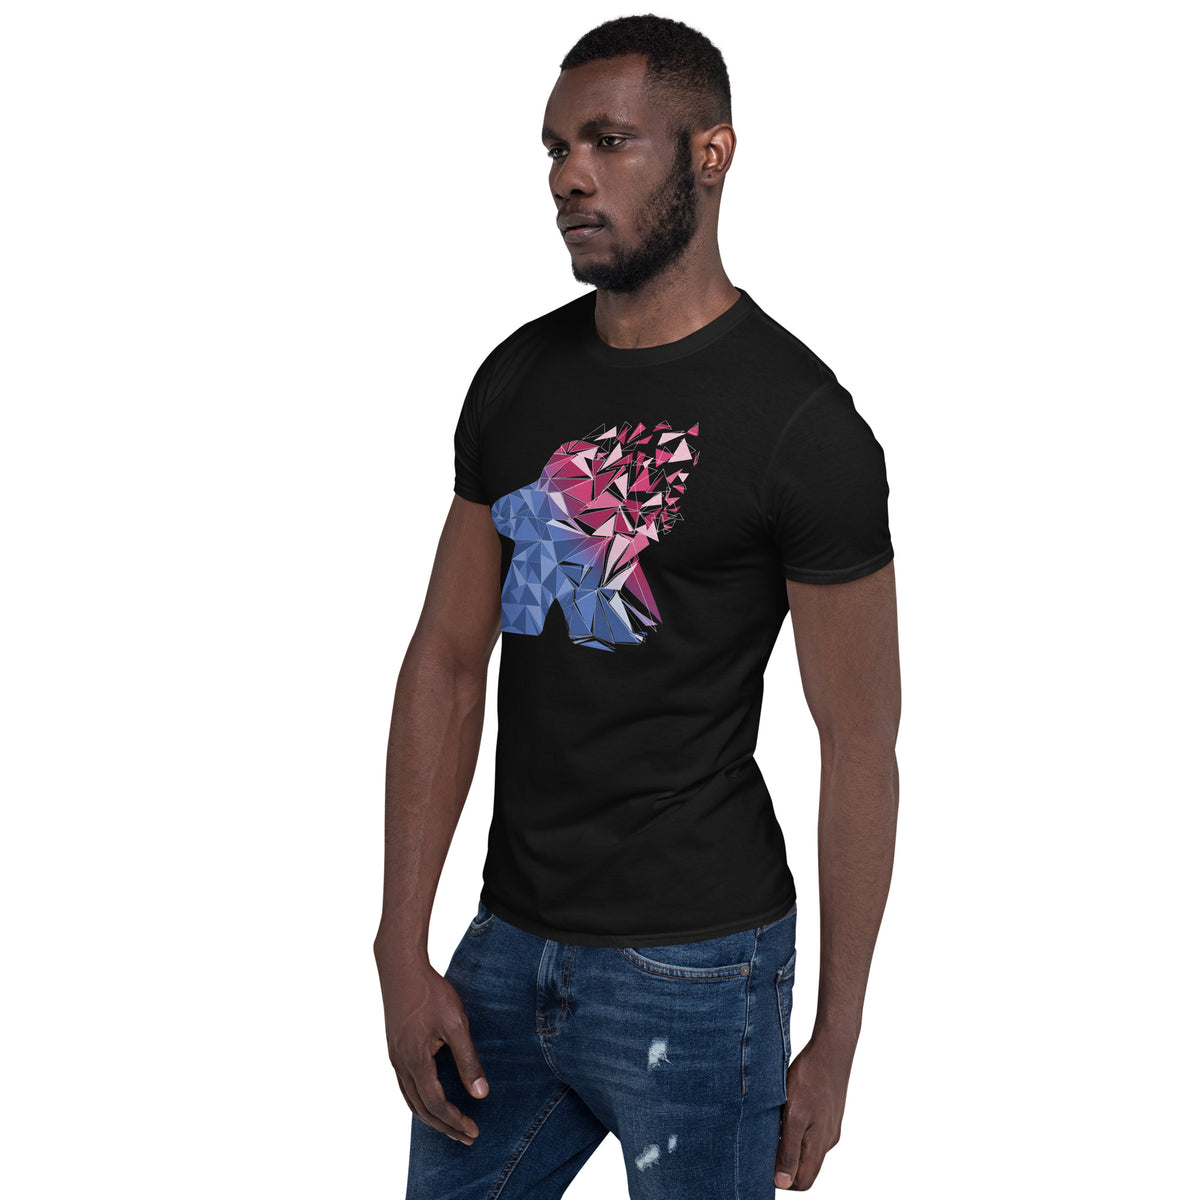 Fragmented Meeple Board Game T-Shirt